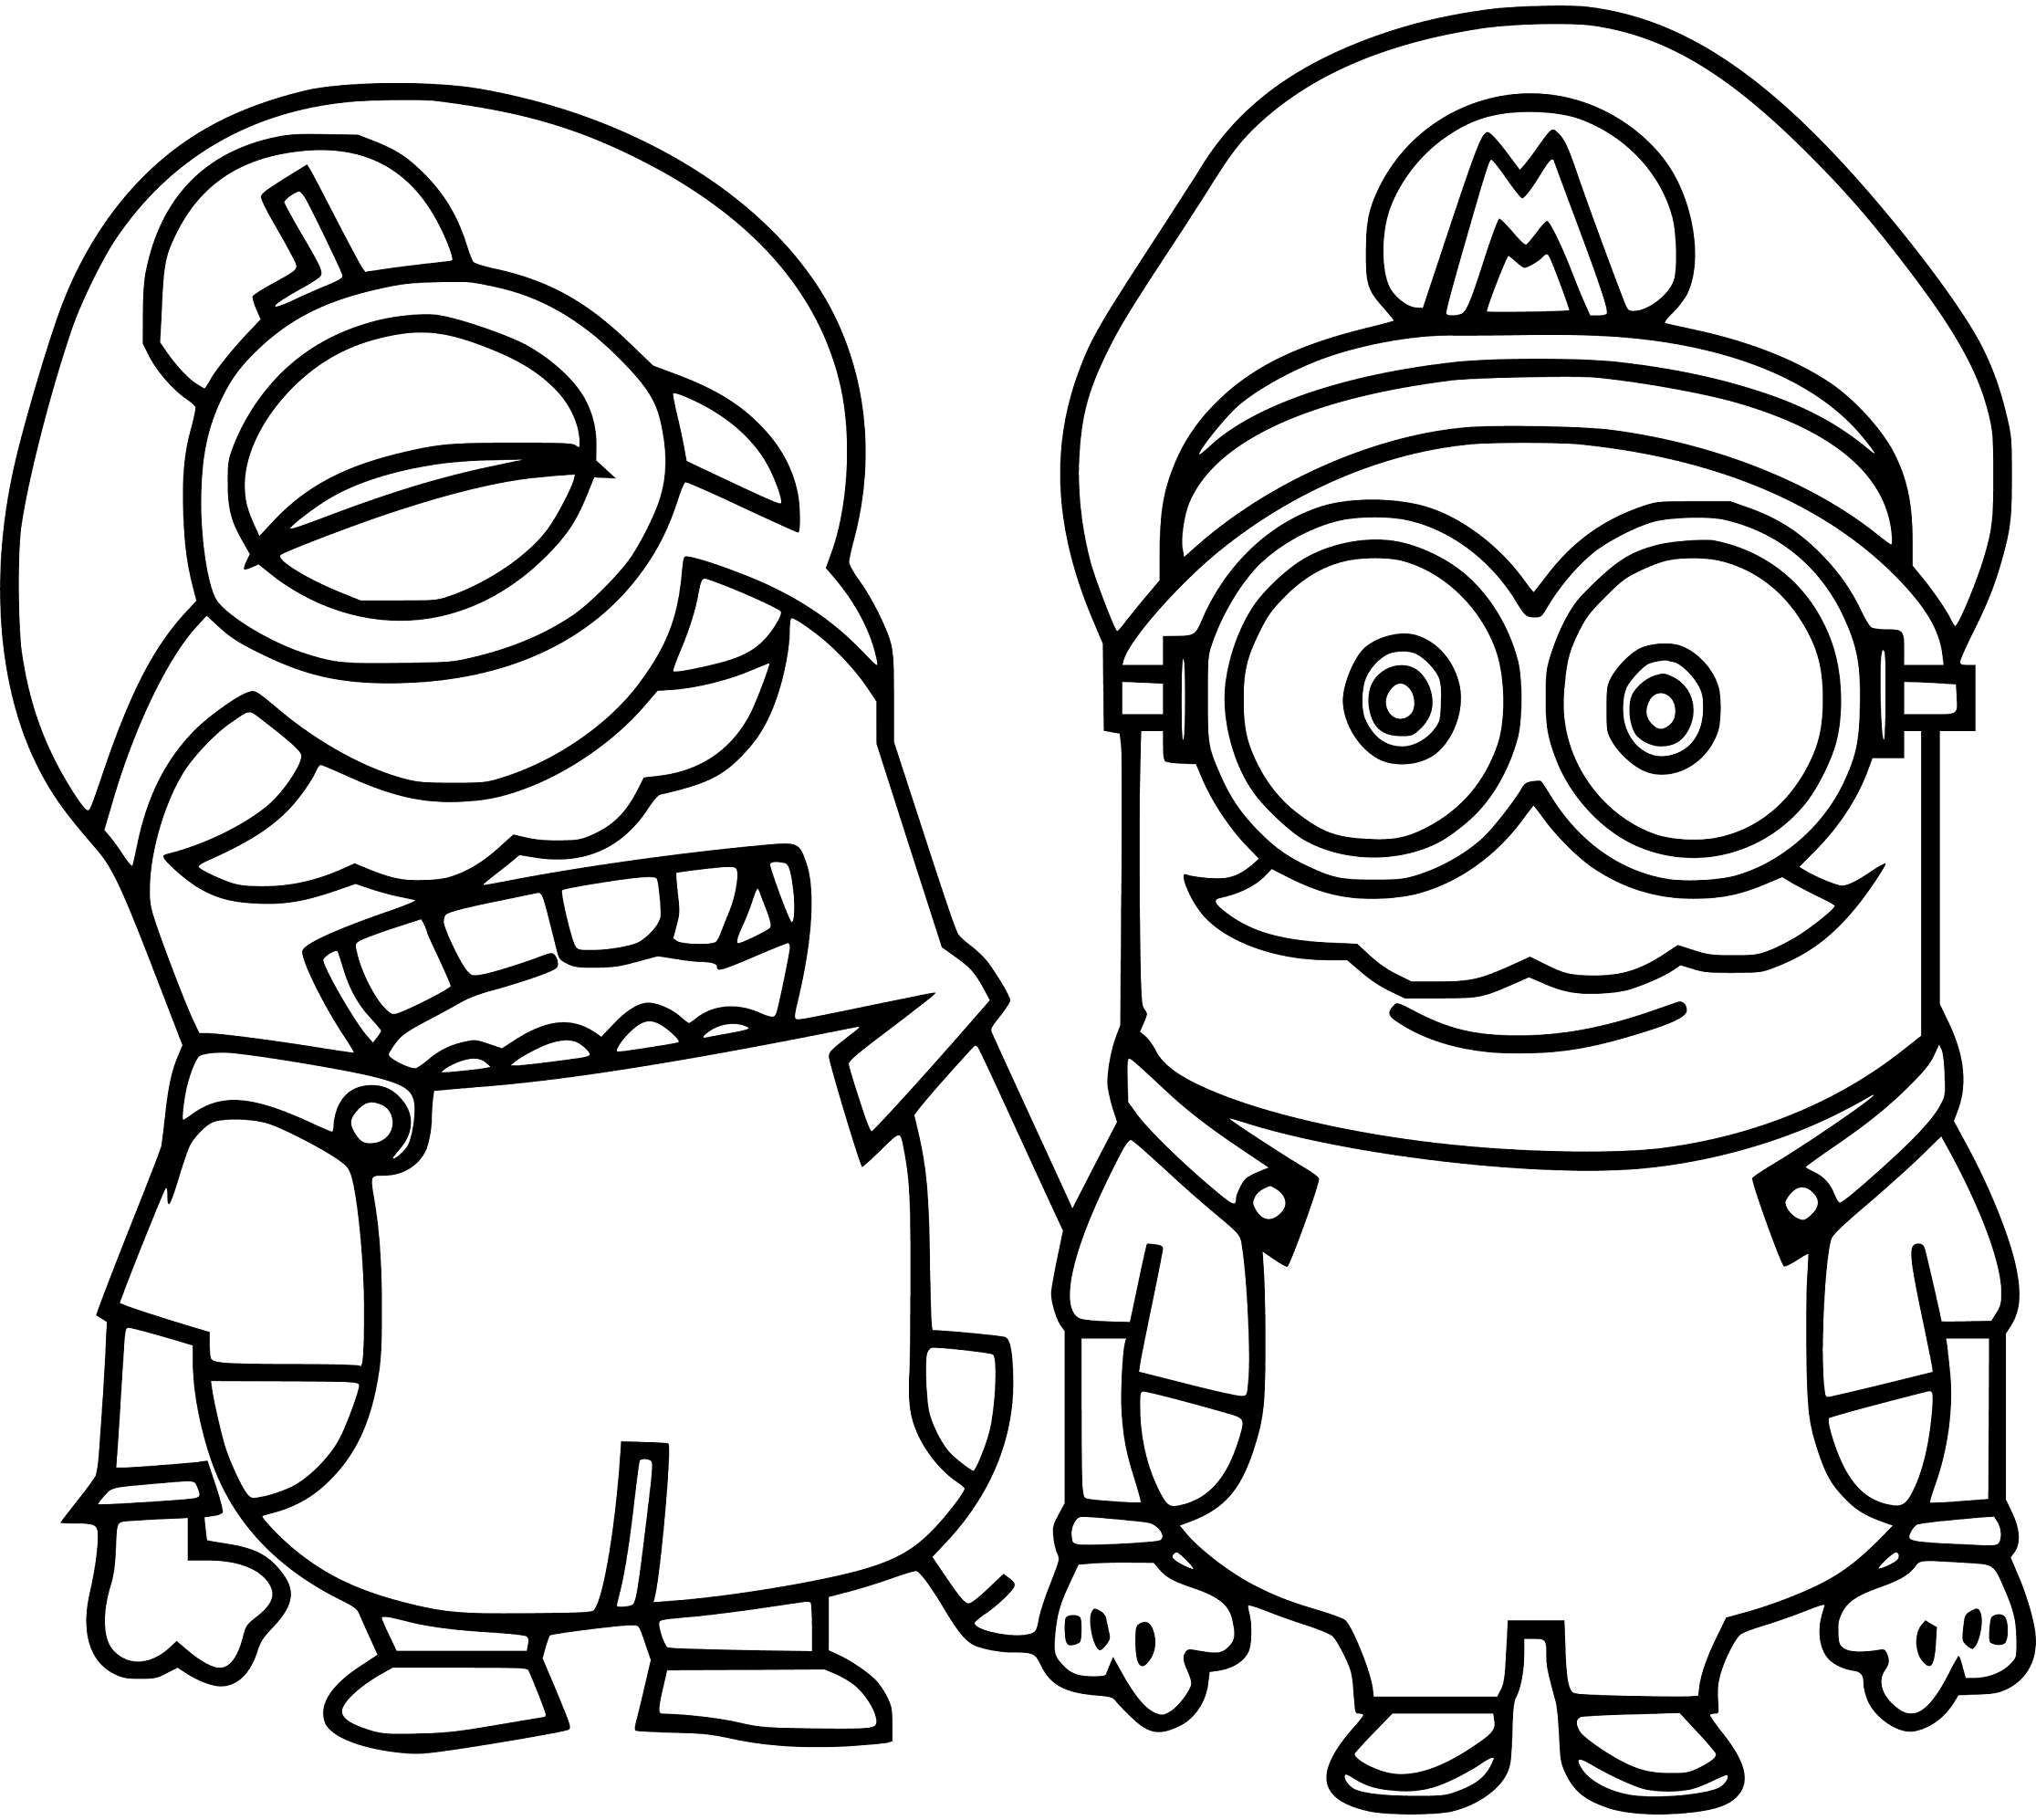 Super Mario Minion Coloring Pages for Kids to Print - SheetalColor.com